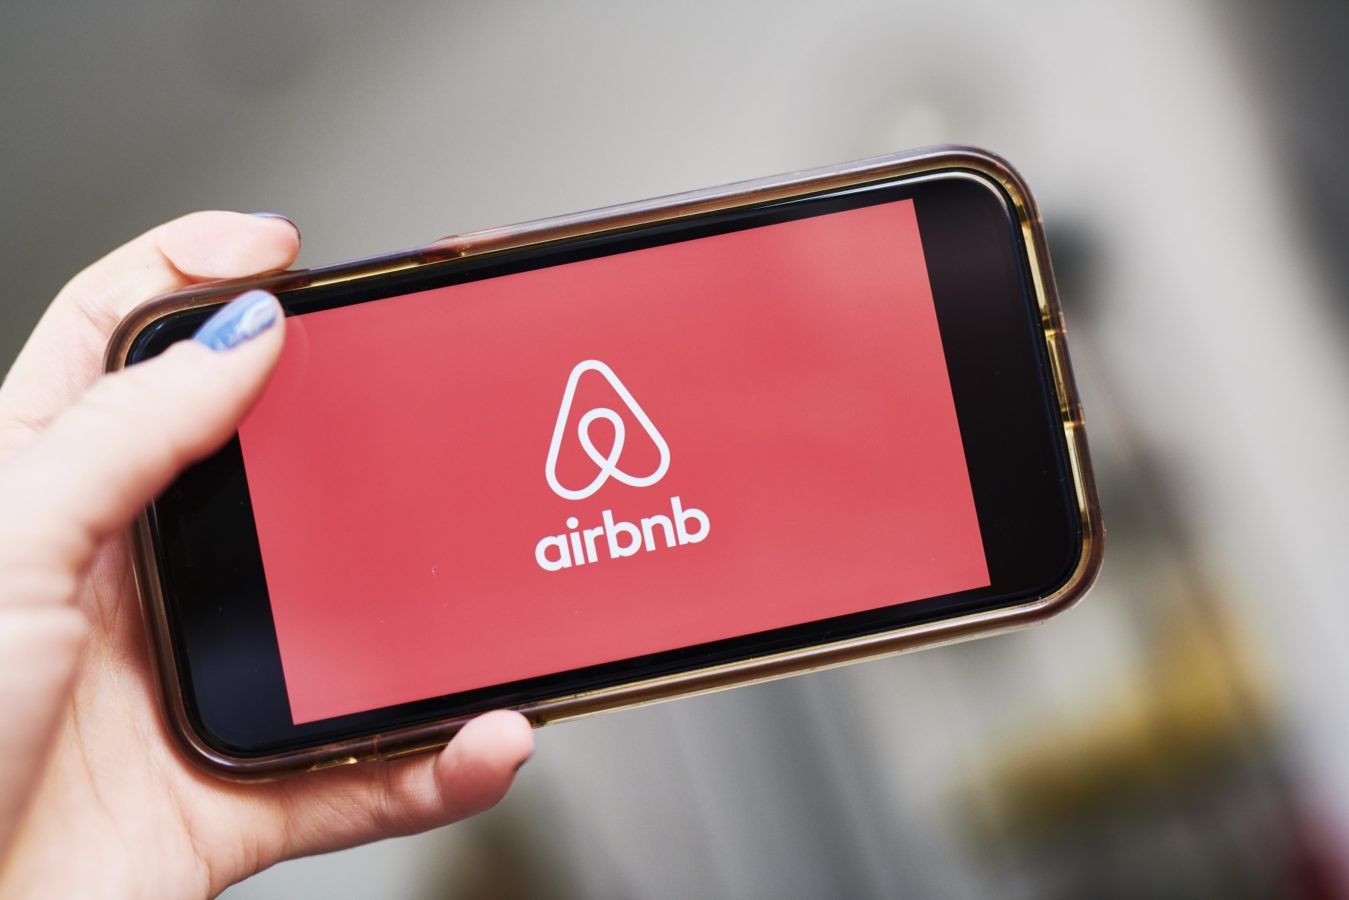 Airbnb users might soon be able to pay for their bookings in cryptocurrency